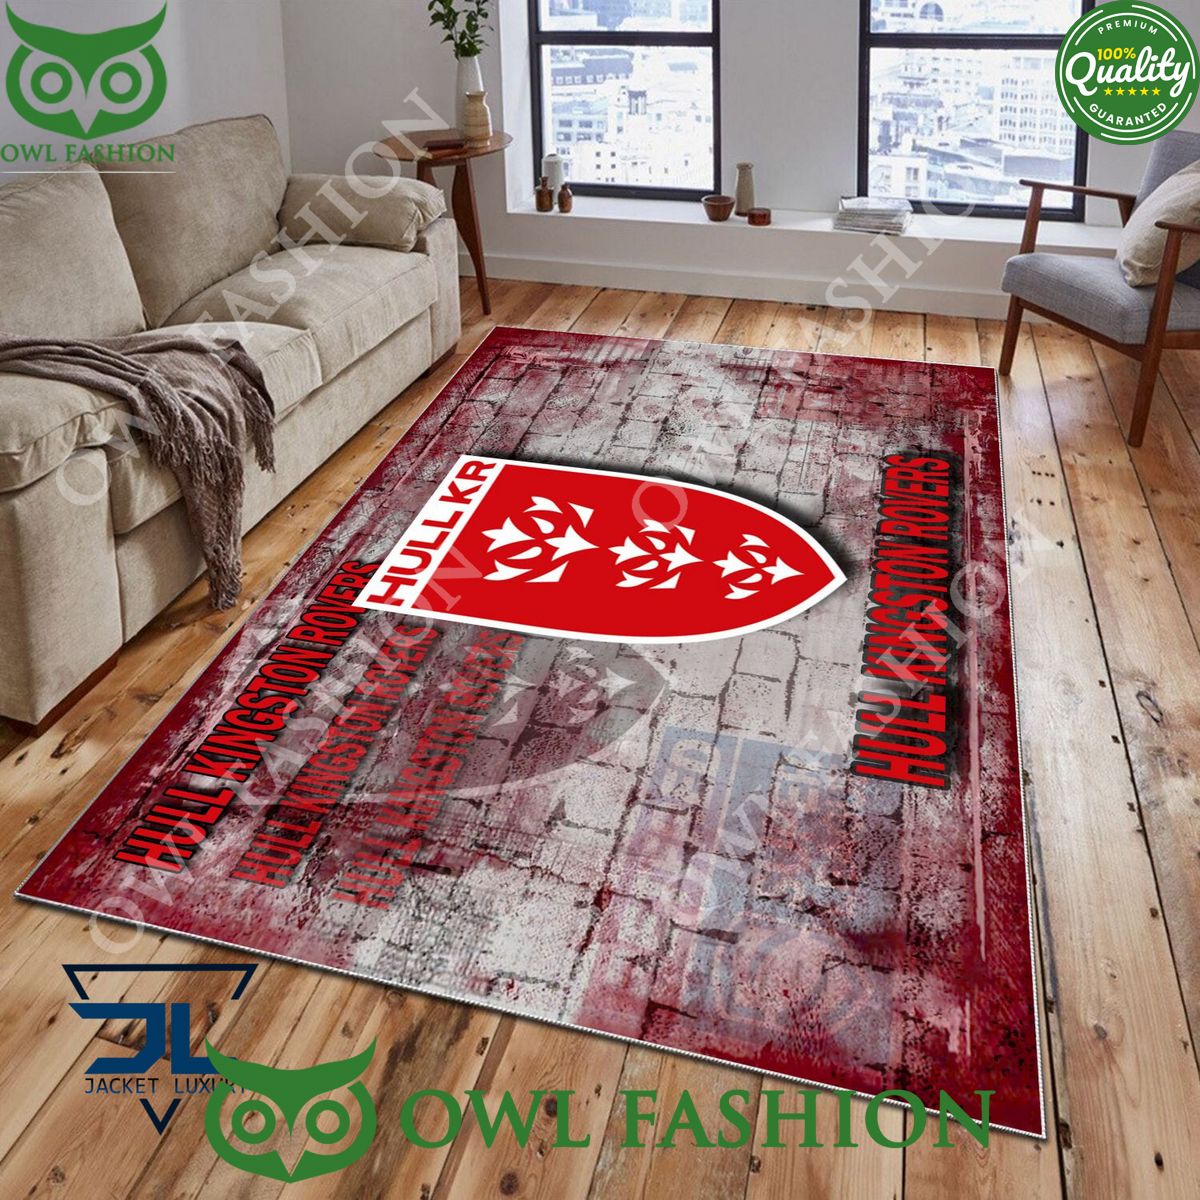 Hull Kingston Rovers Super League Rugby Carpet Rug